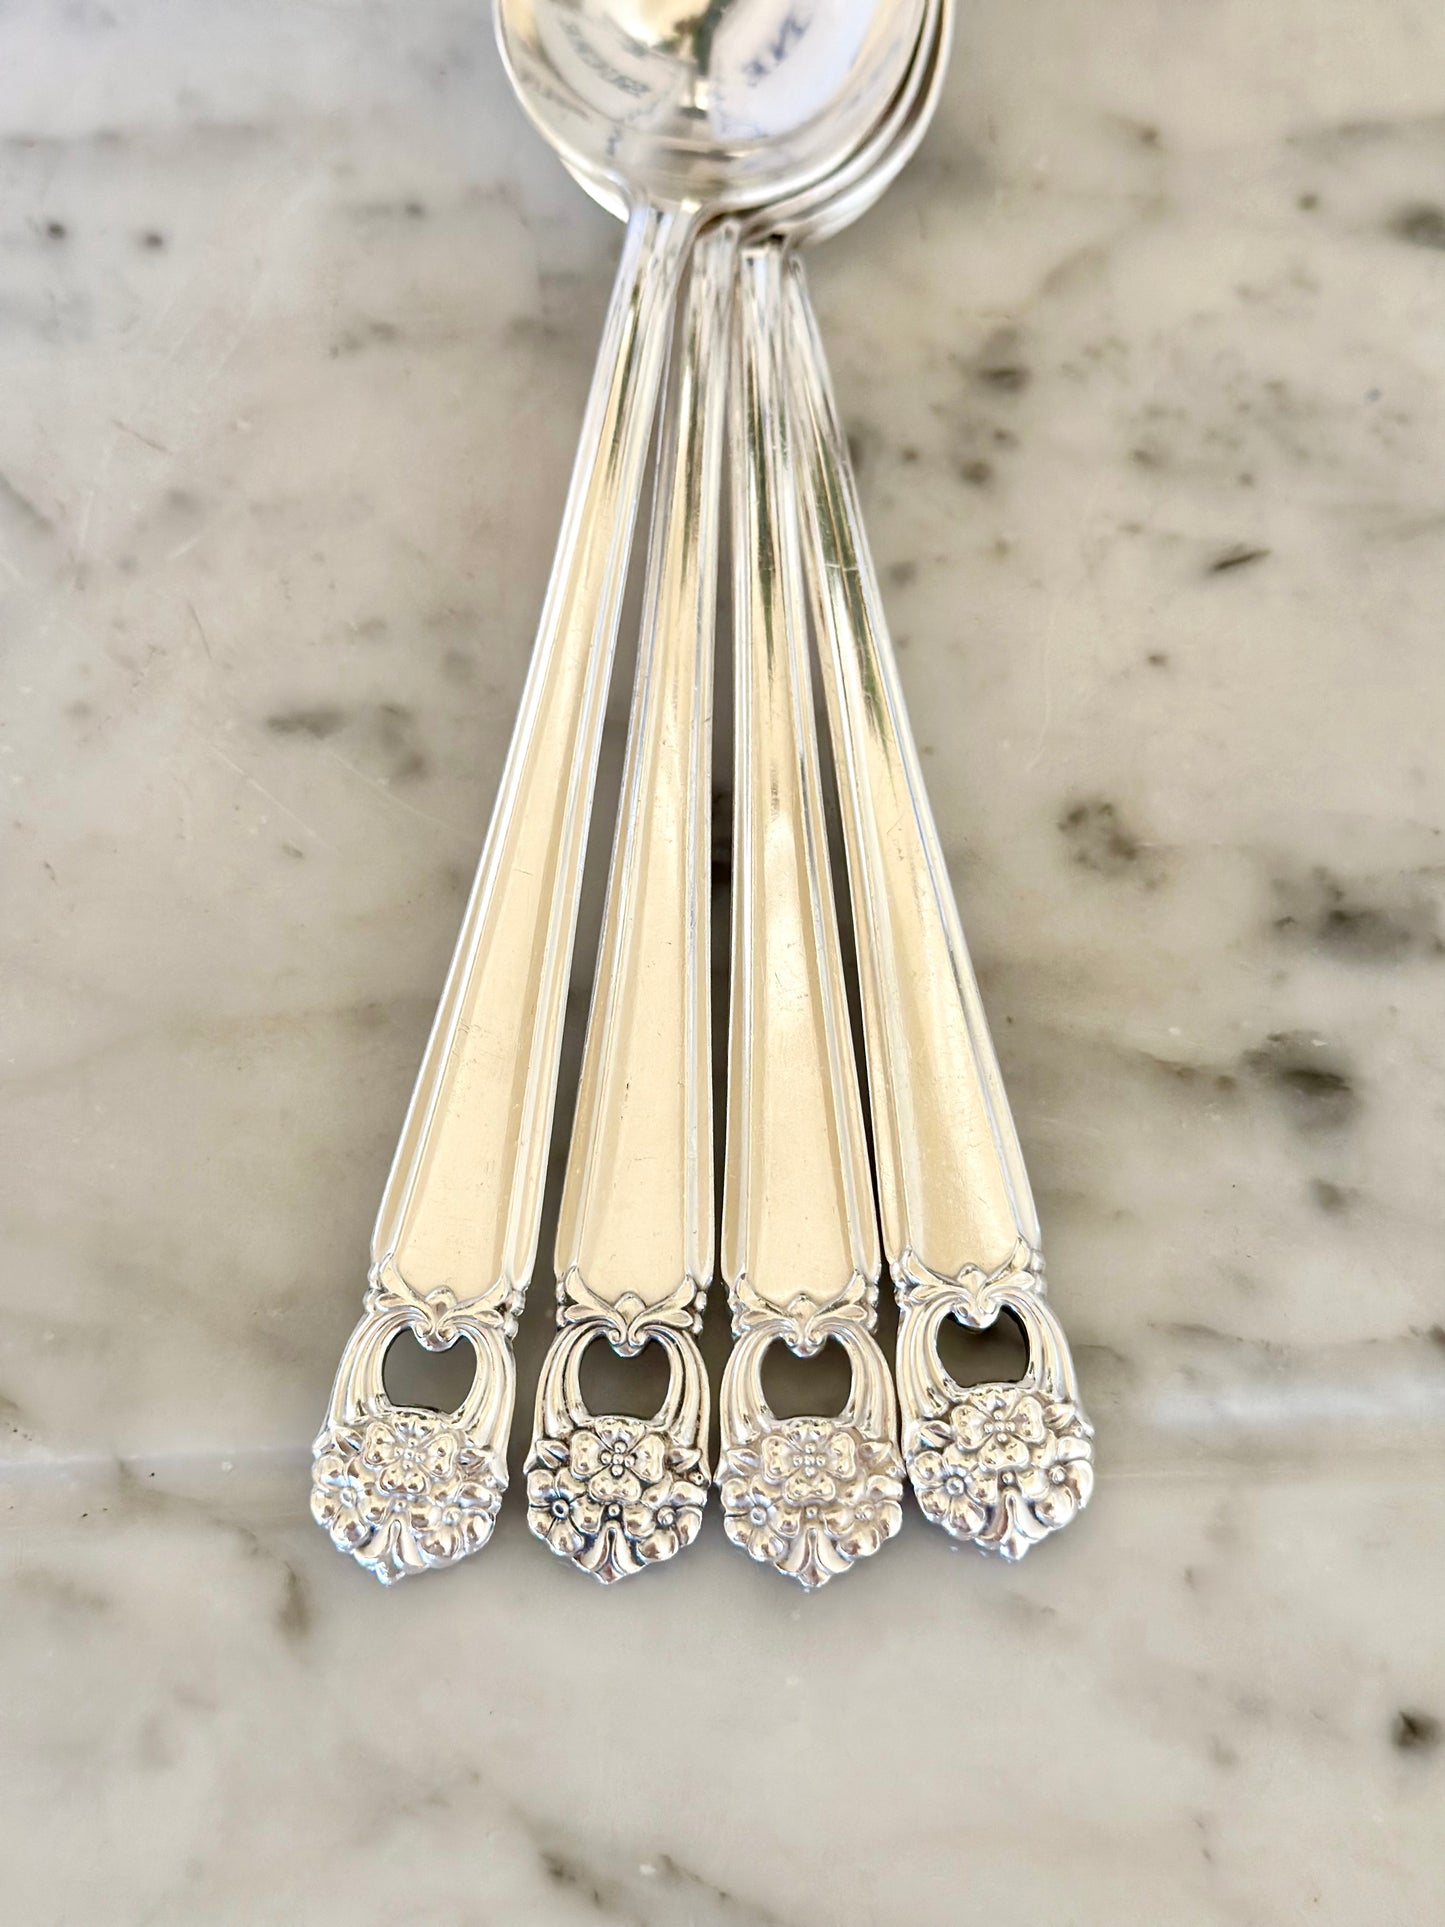 Silverplate Serving Spoons (Set of 4)